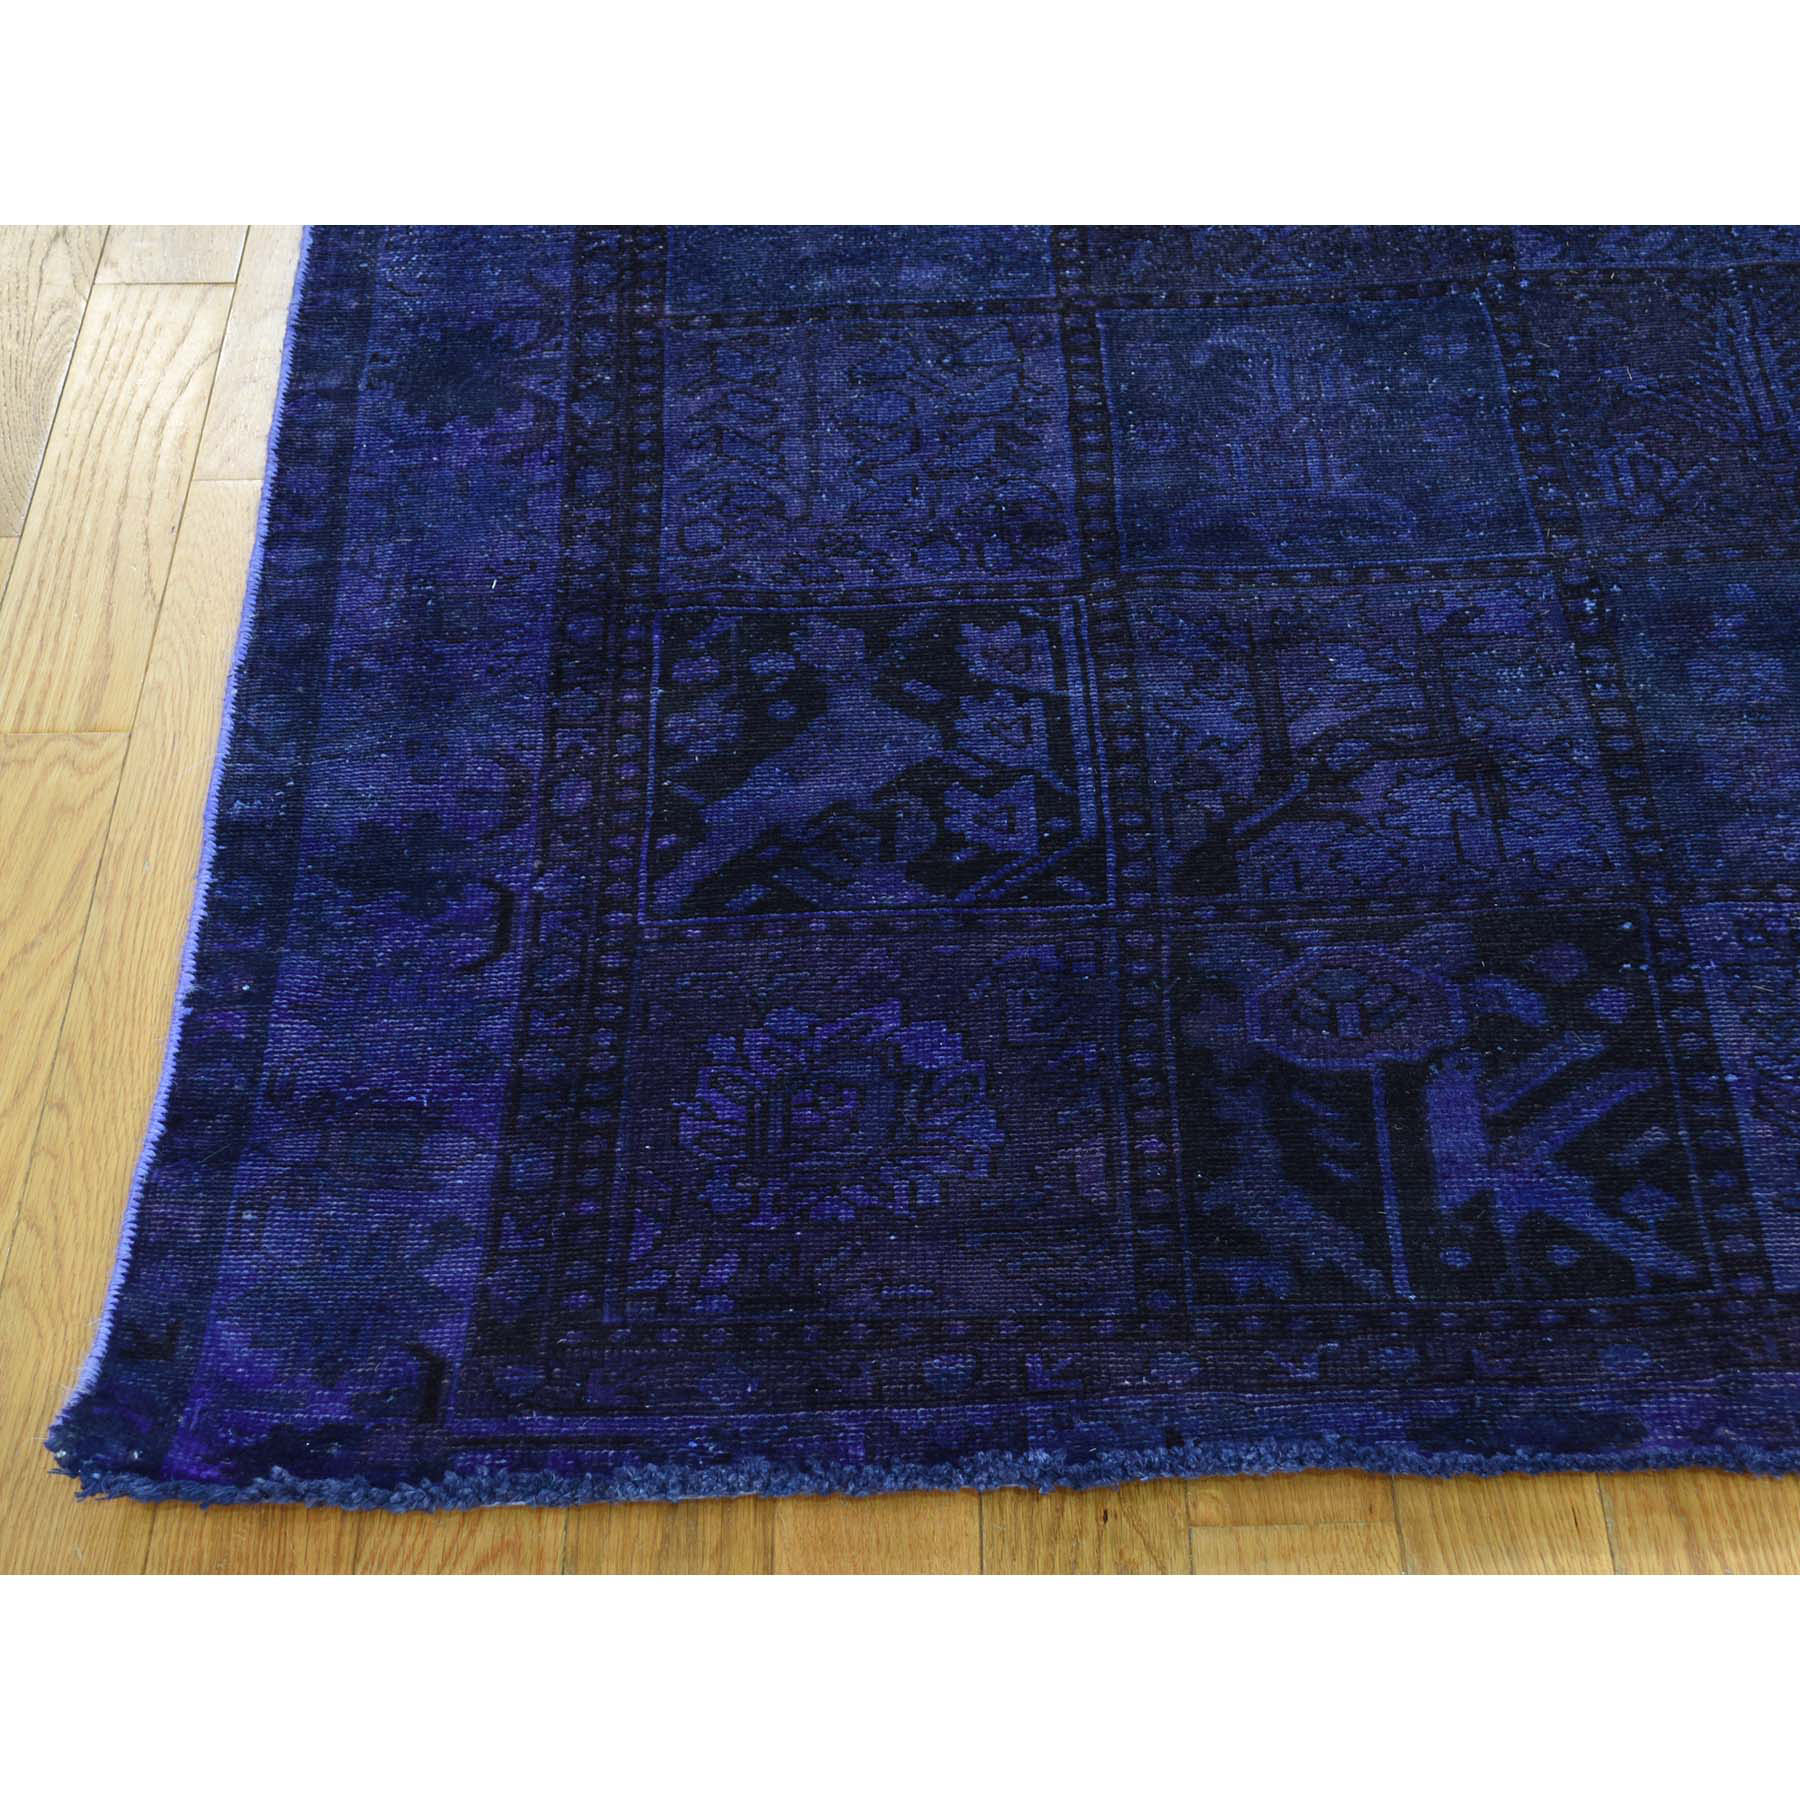 5-6 x10- On clearance Hand-Knotted Bakhtiari Garden Design Overdyed Wide Runner Rug 